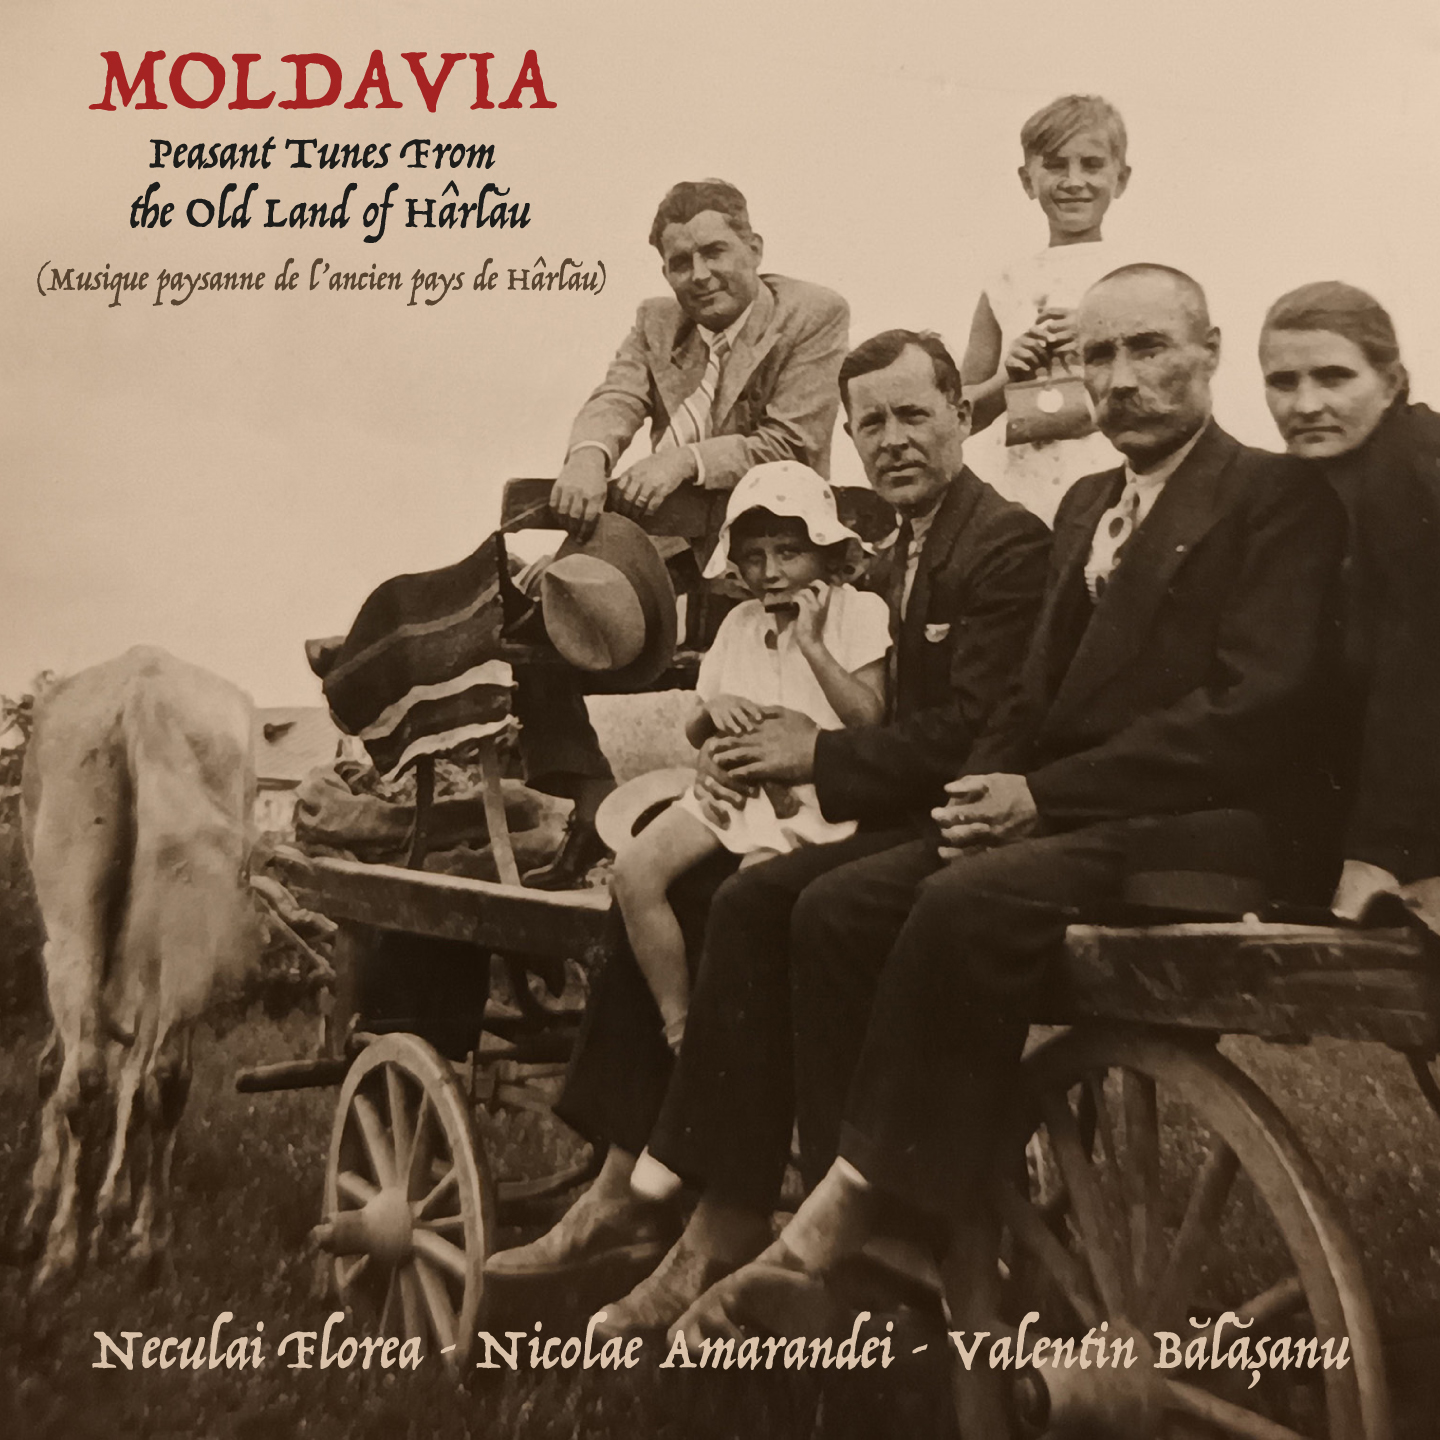 moldavia-peasant-tunes-from-the-old-land-of-harlsu